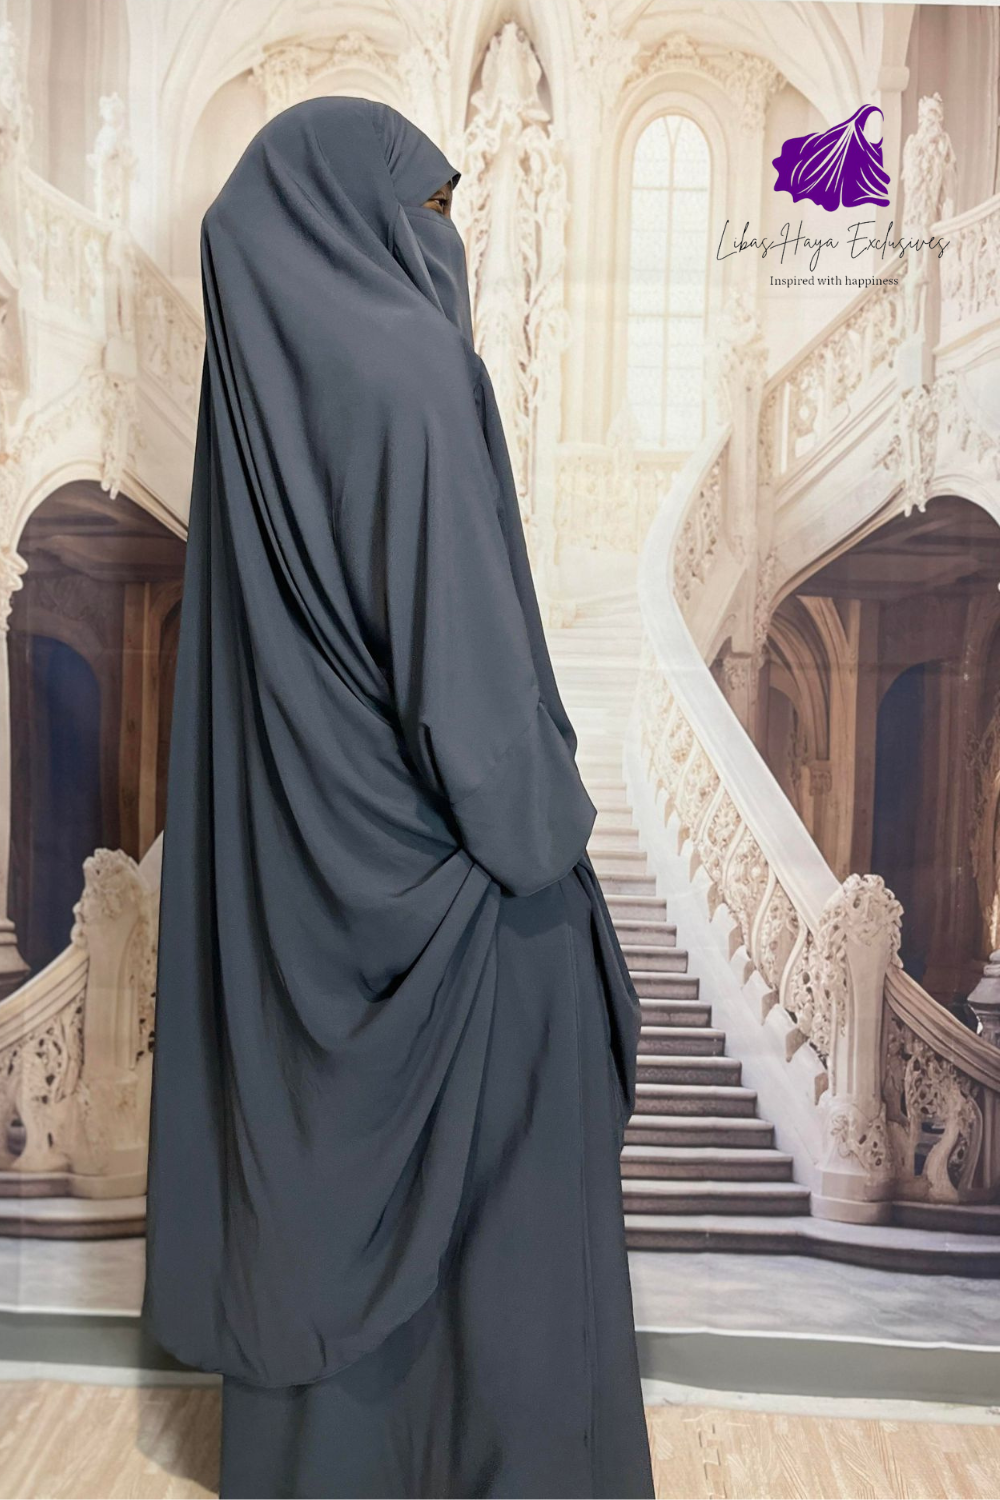 jilbab with skirt in color gray